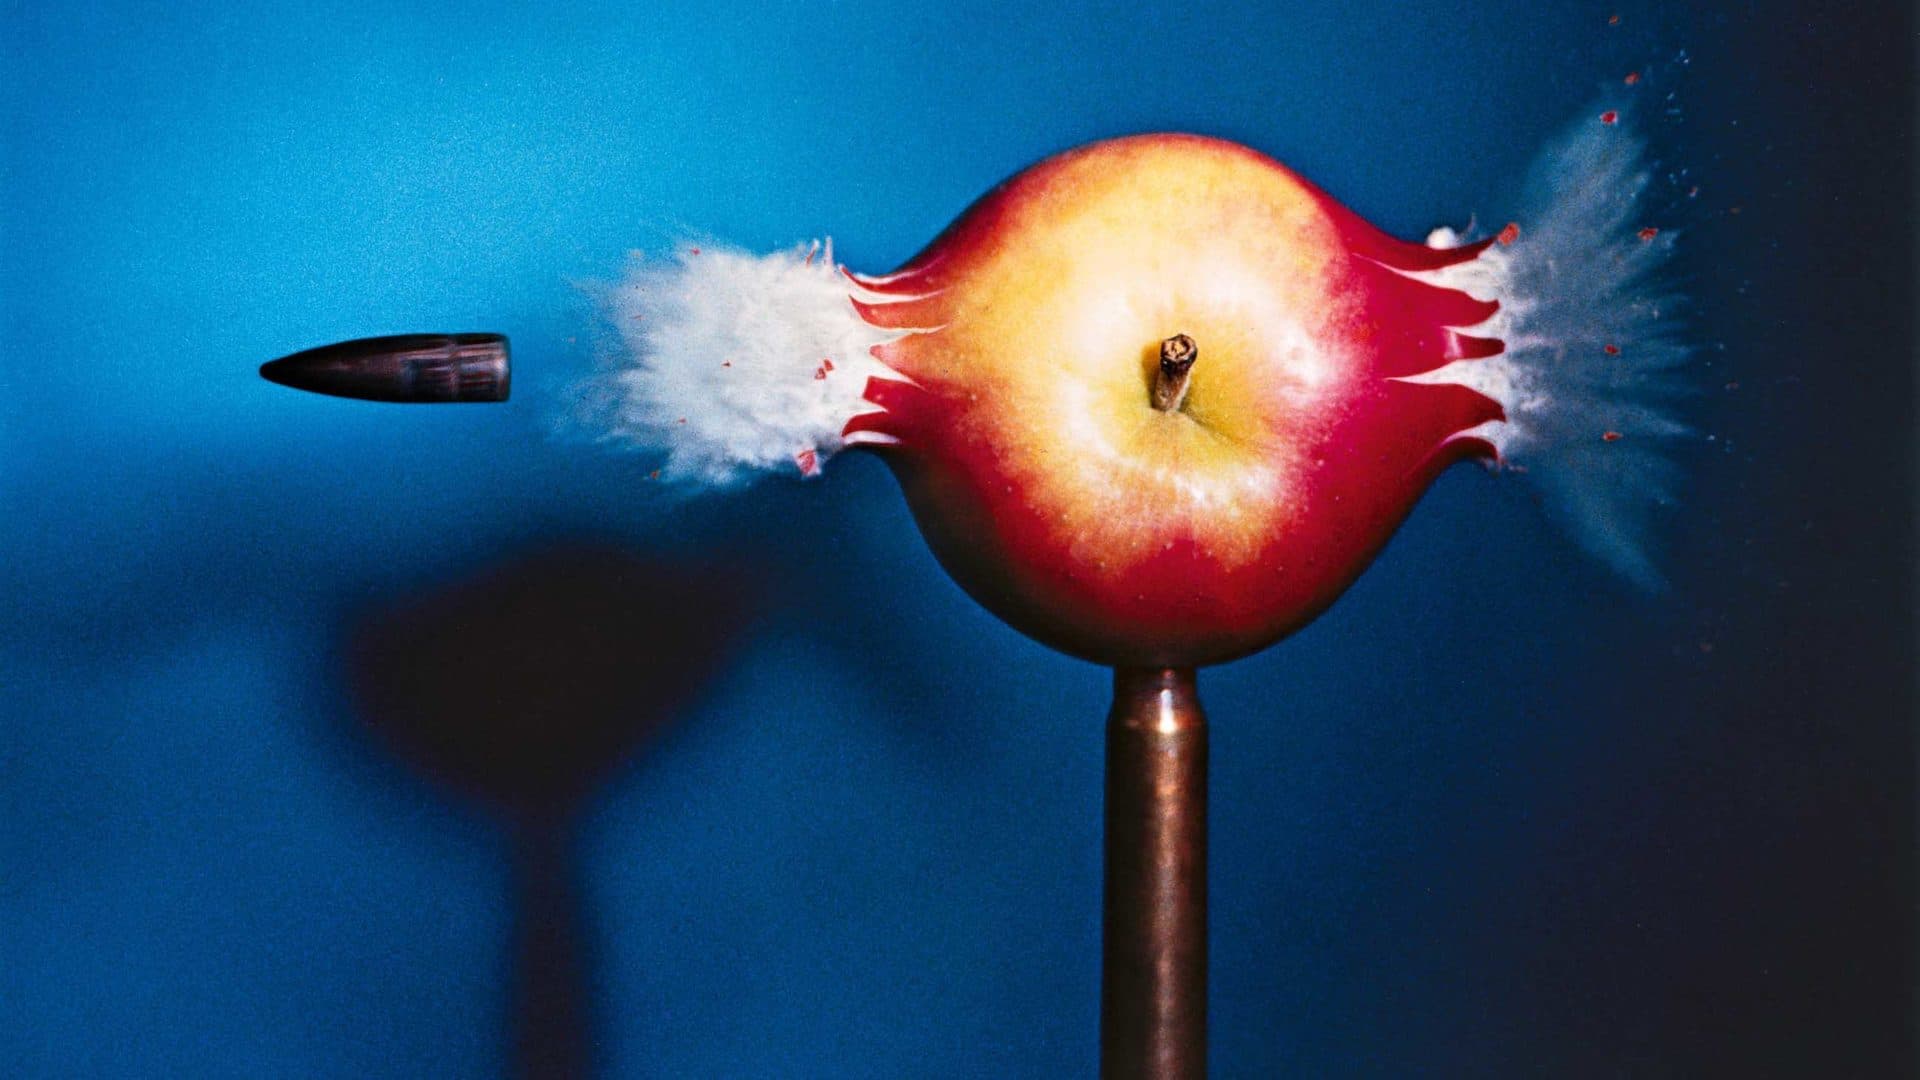 Using evermore sophisticated equipment, Edgerton pushed the boundaries of flash photography. Here, his 1964 image "Bullet through apple."